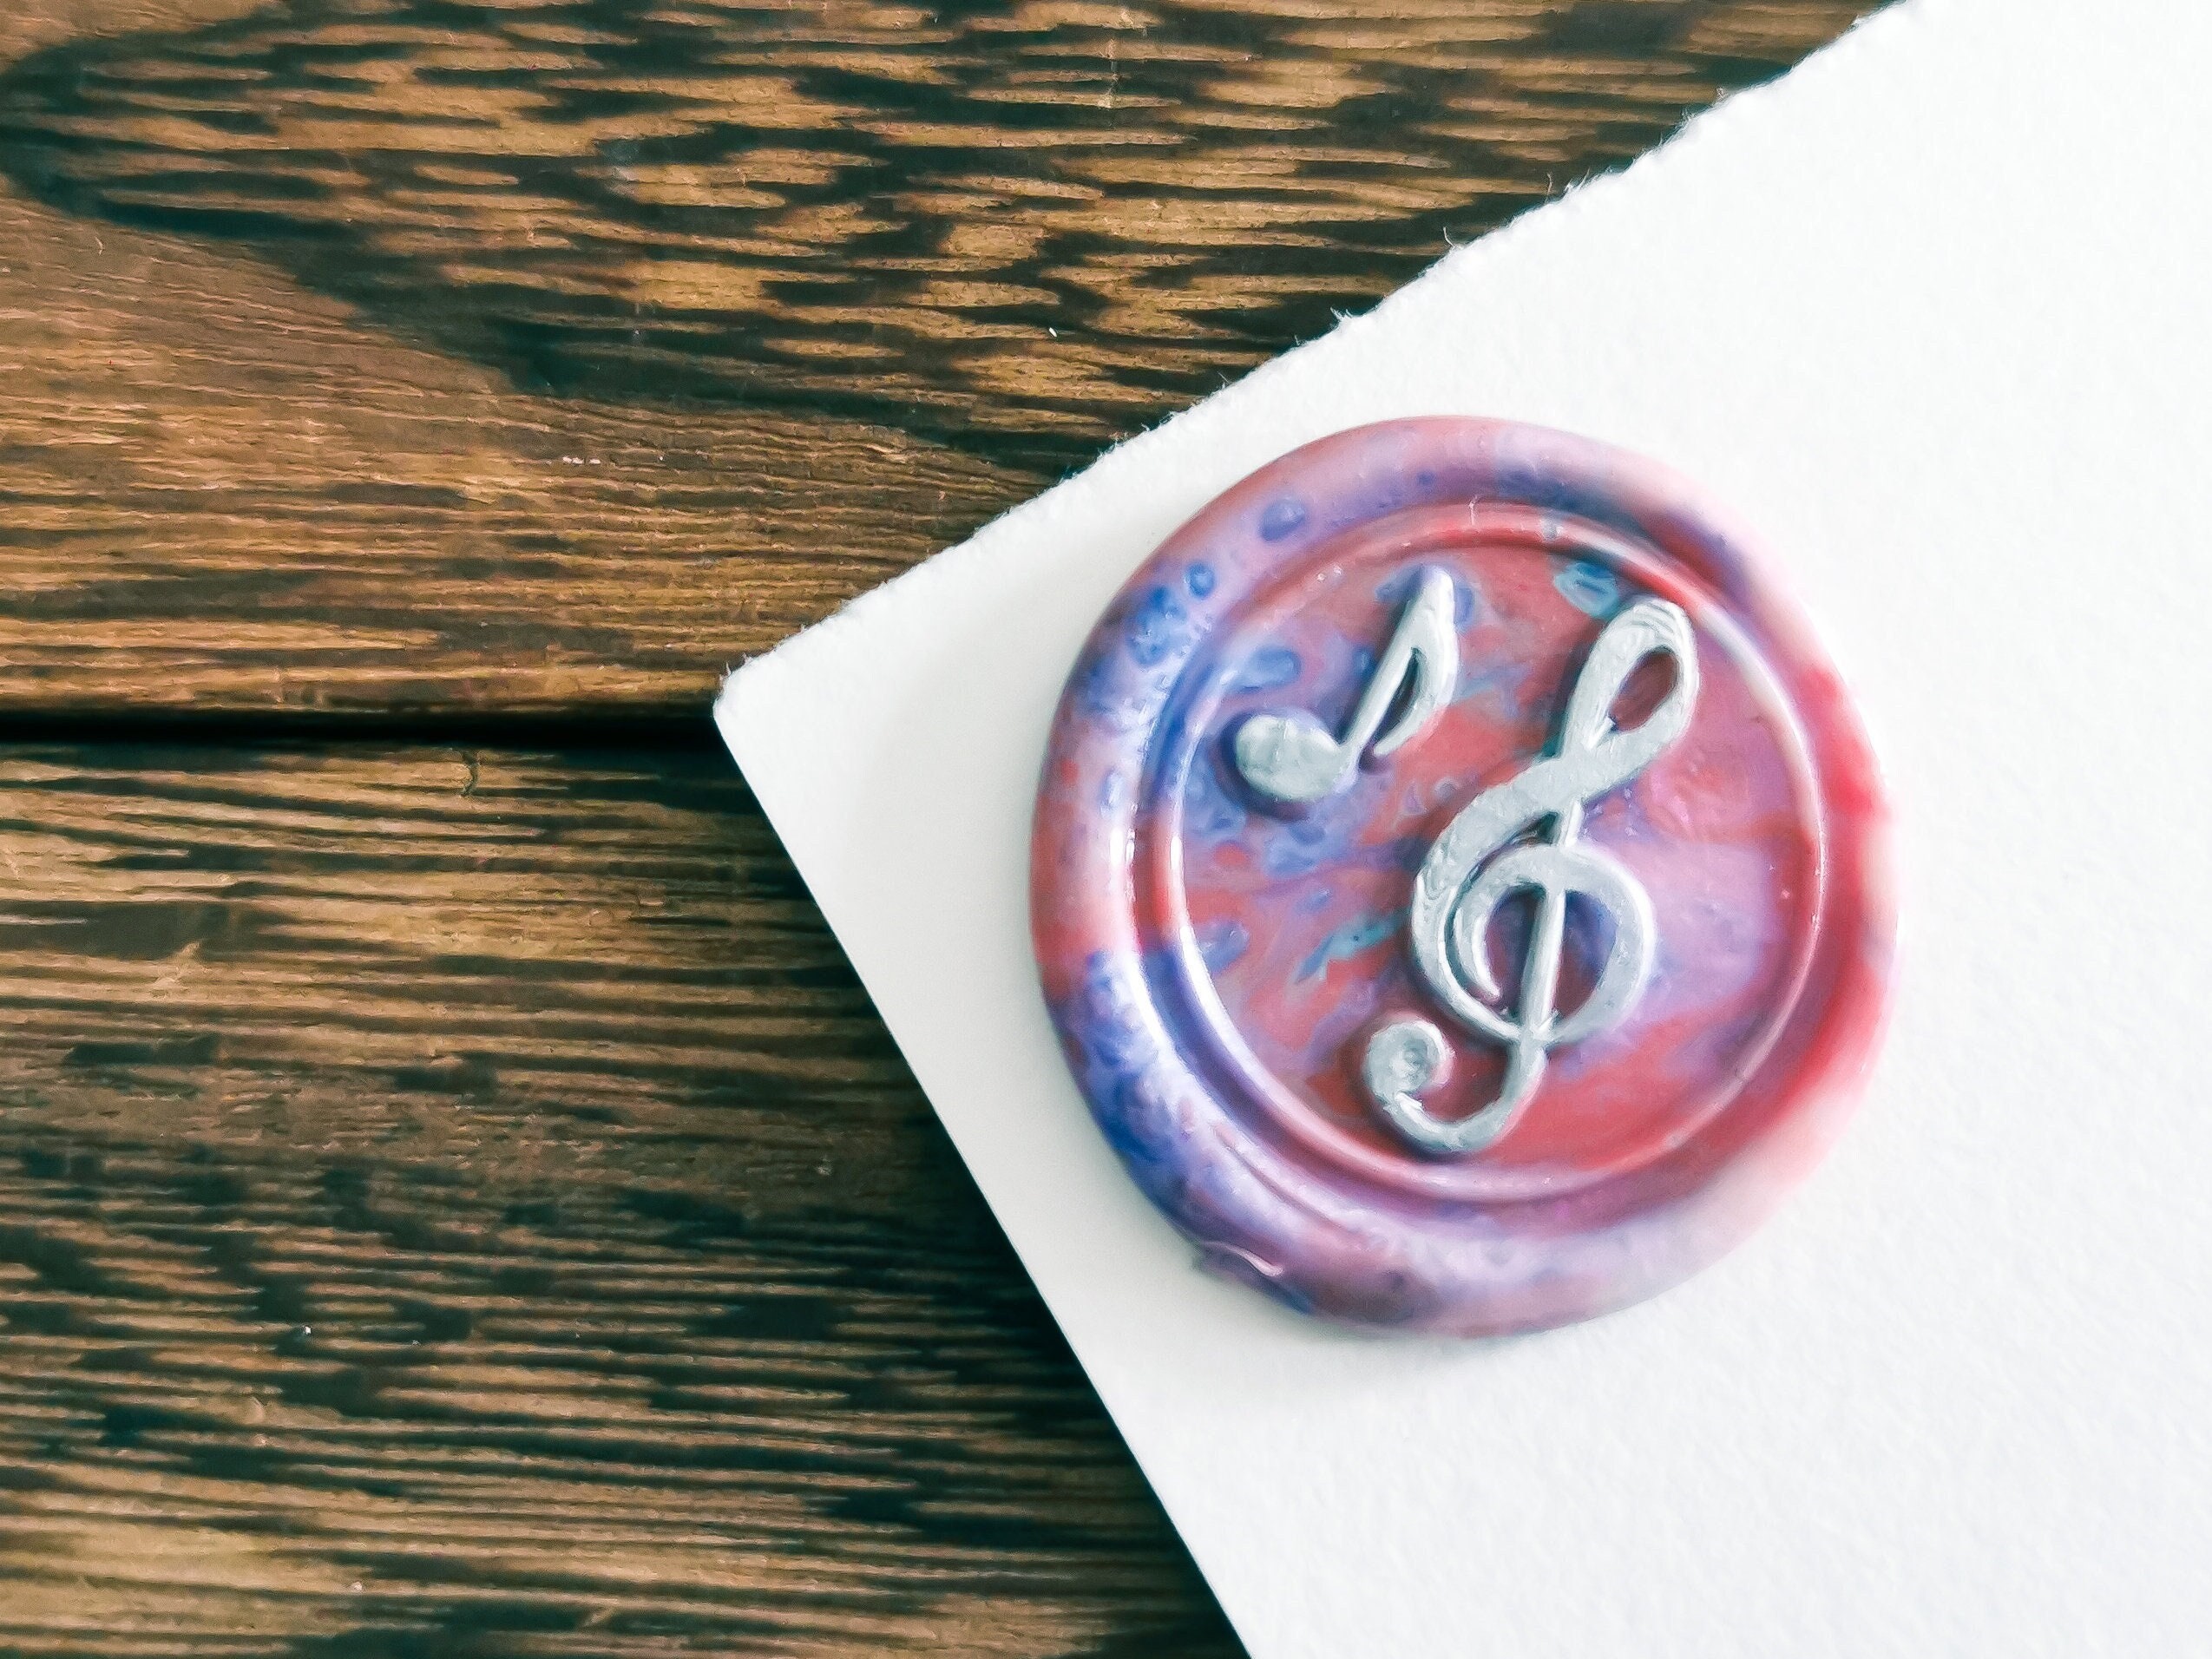 MUSIC HEART Wax Seal Stamp / Wedding Invitation / Bass and Treble Clef /  Birthday Party / Envelope Letter Seal / Gift Box Set 